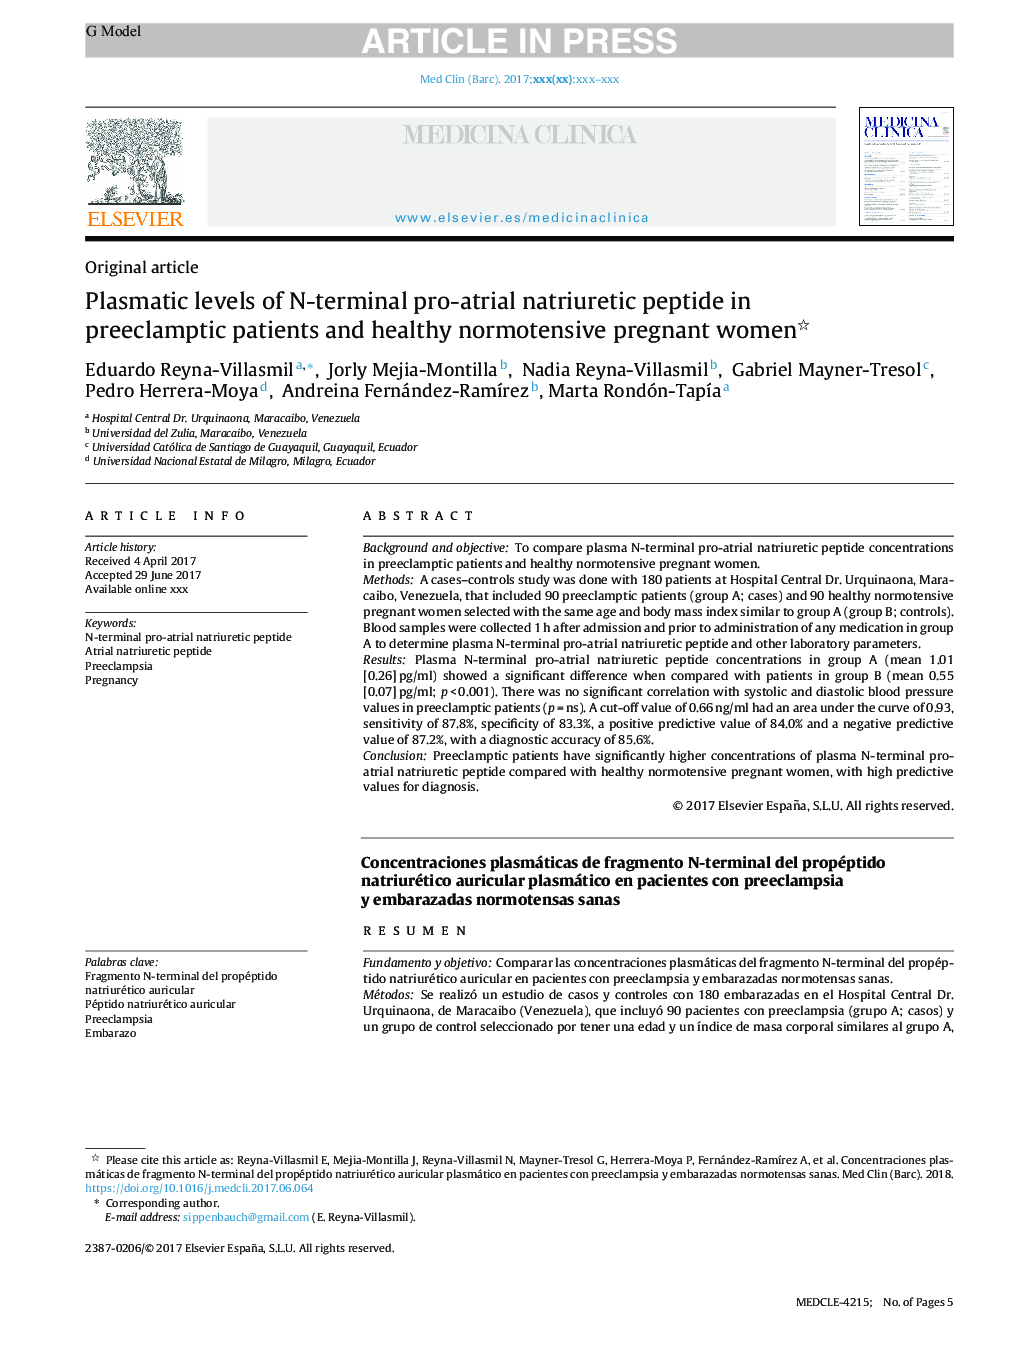 Plasmatic levels of N-terminal pro-atrial natriuretic peptide in preeclamptic patients and healthy normotensive pregnant women